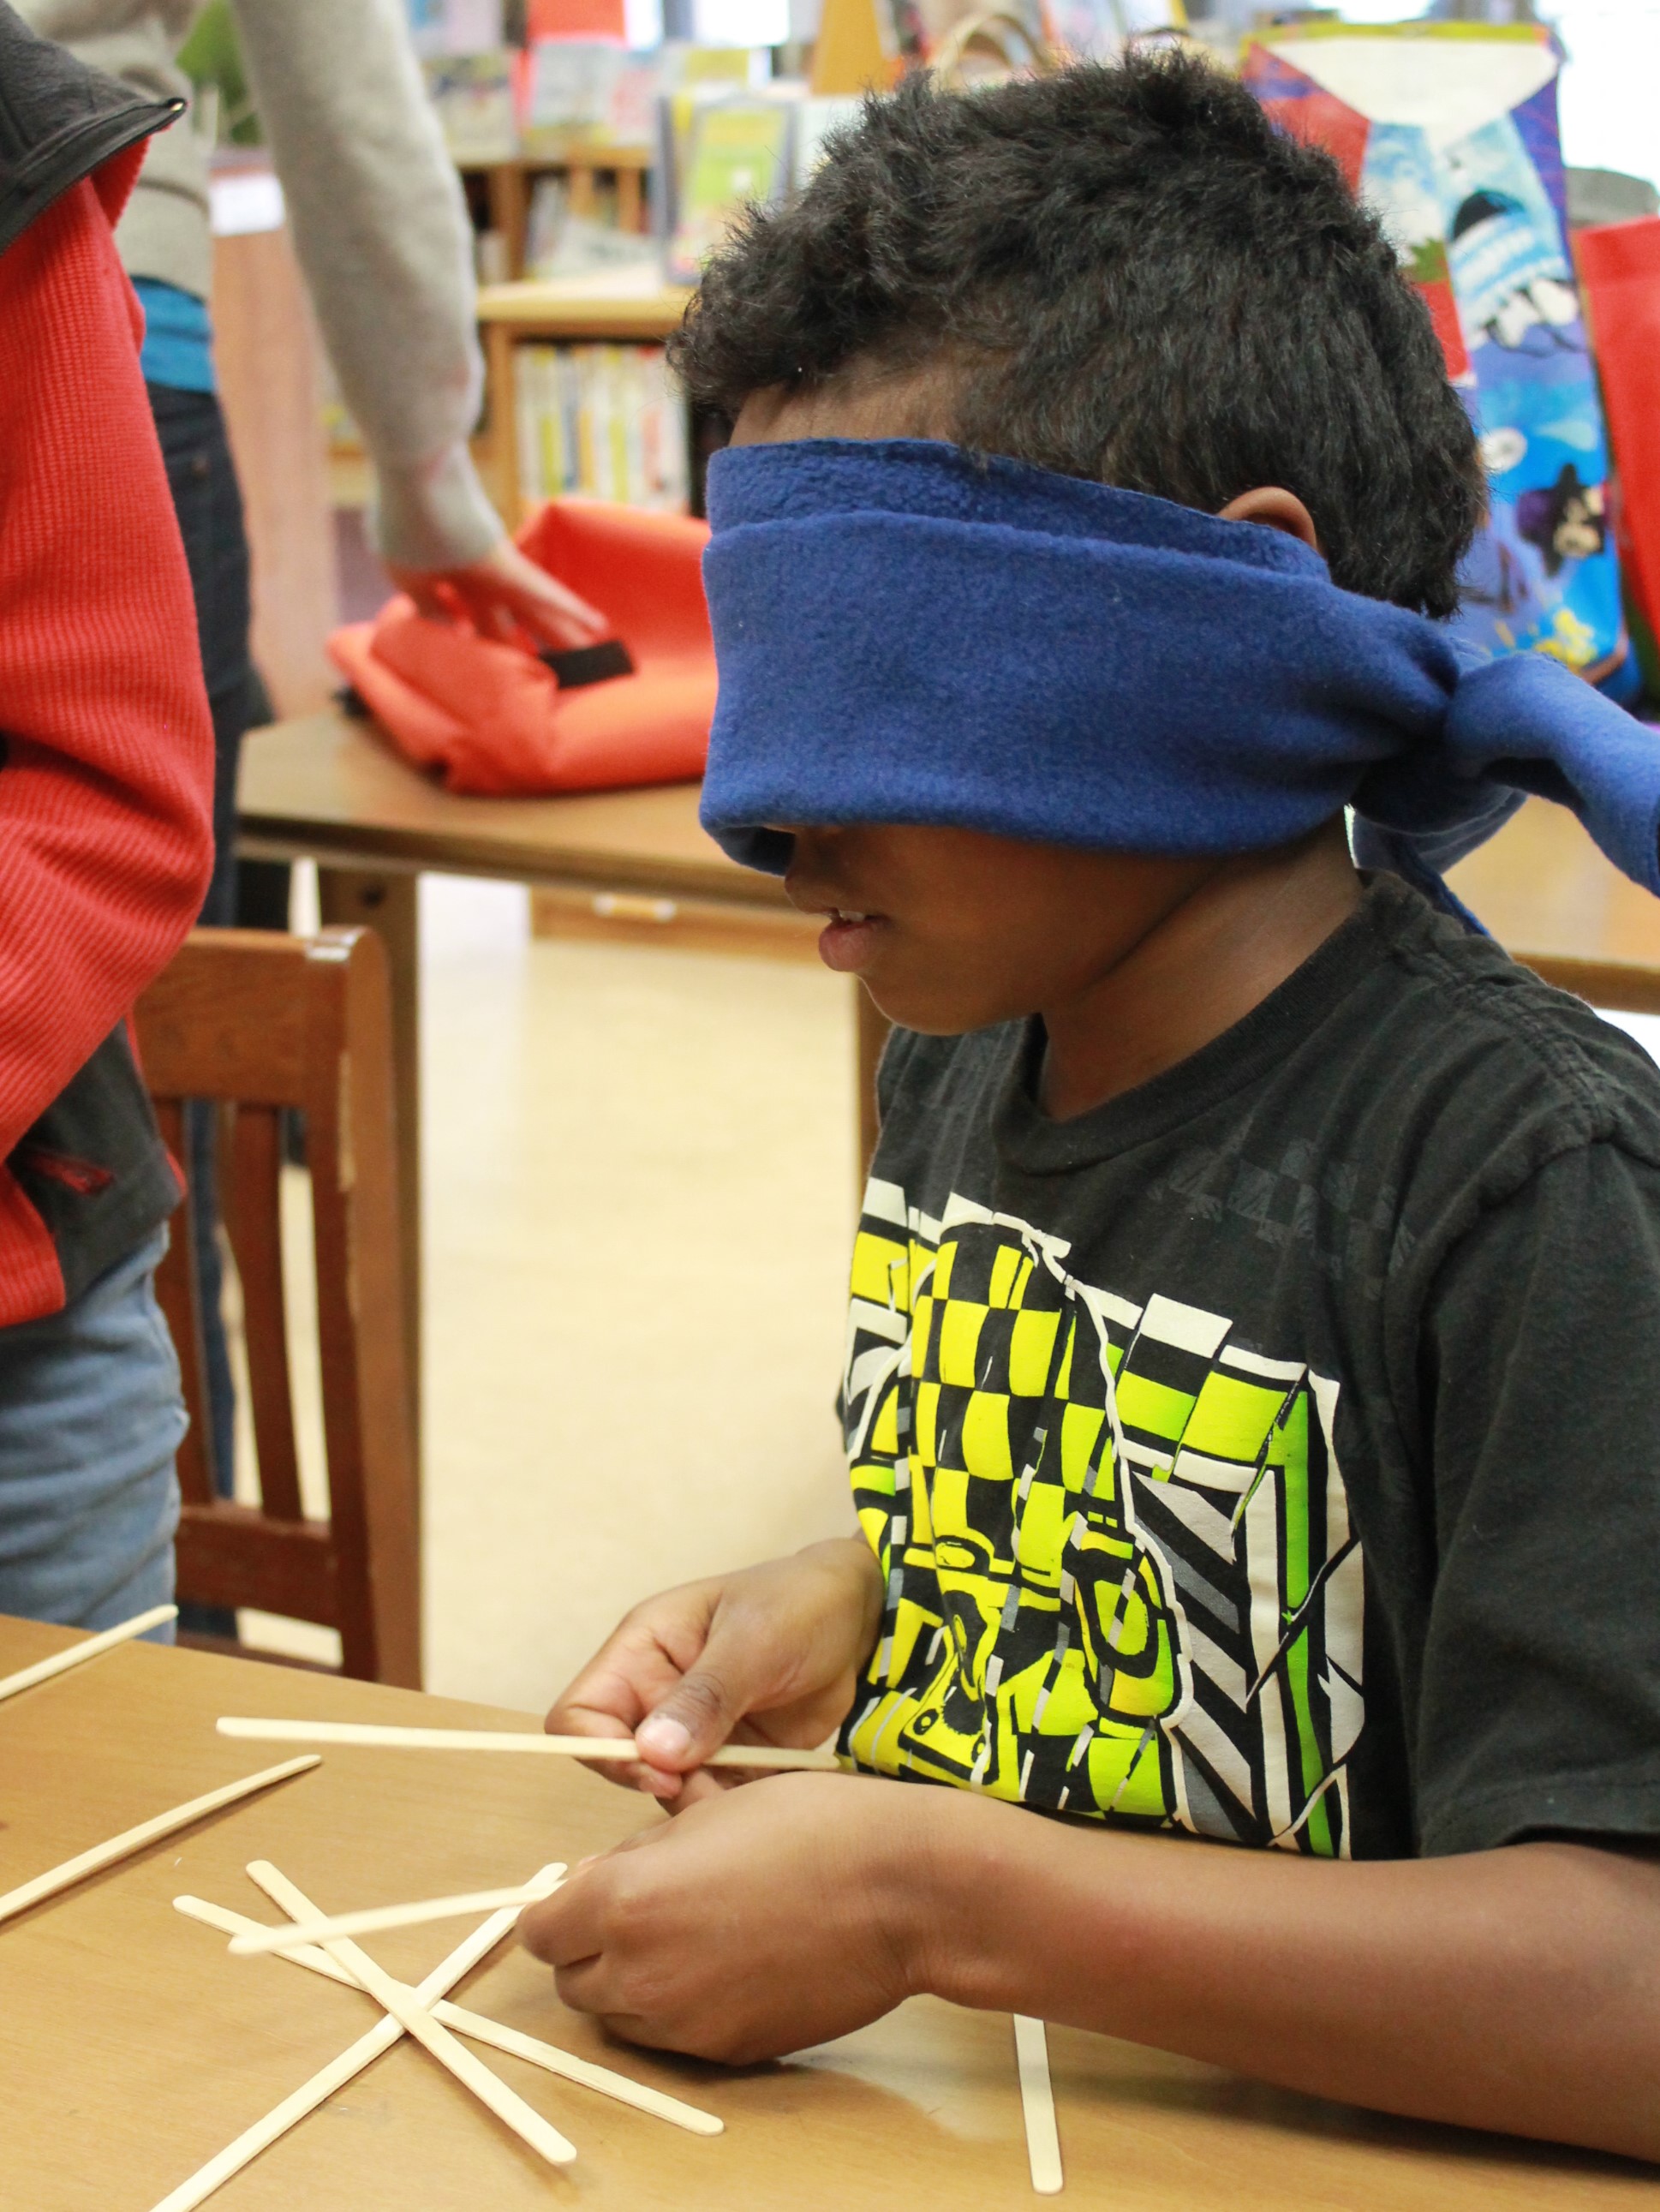 Boy with a blindfold tries to build a structure at a school inclusion awareness event